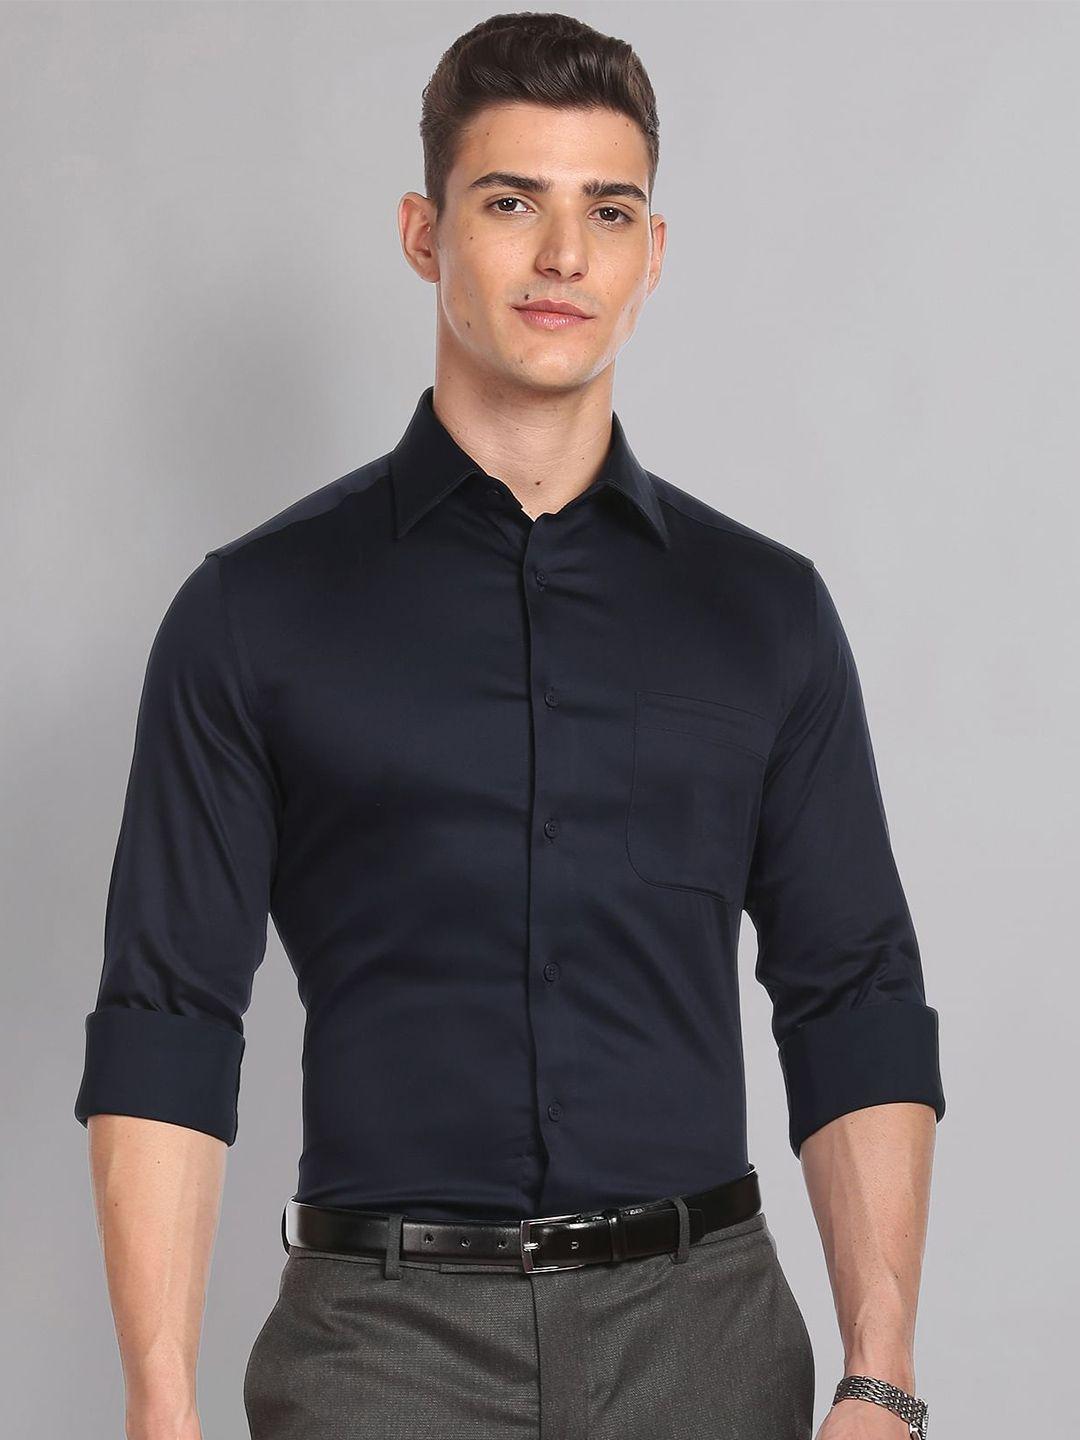 ad by arvind spread collar polycotton opaque formal shirt